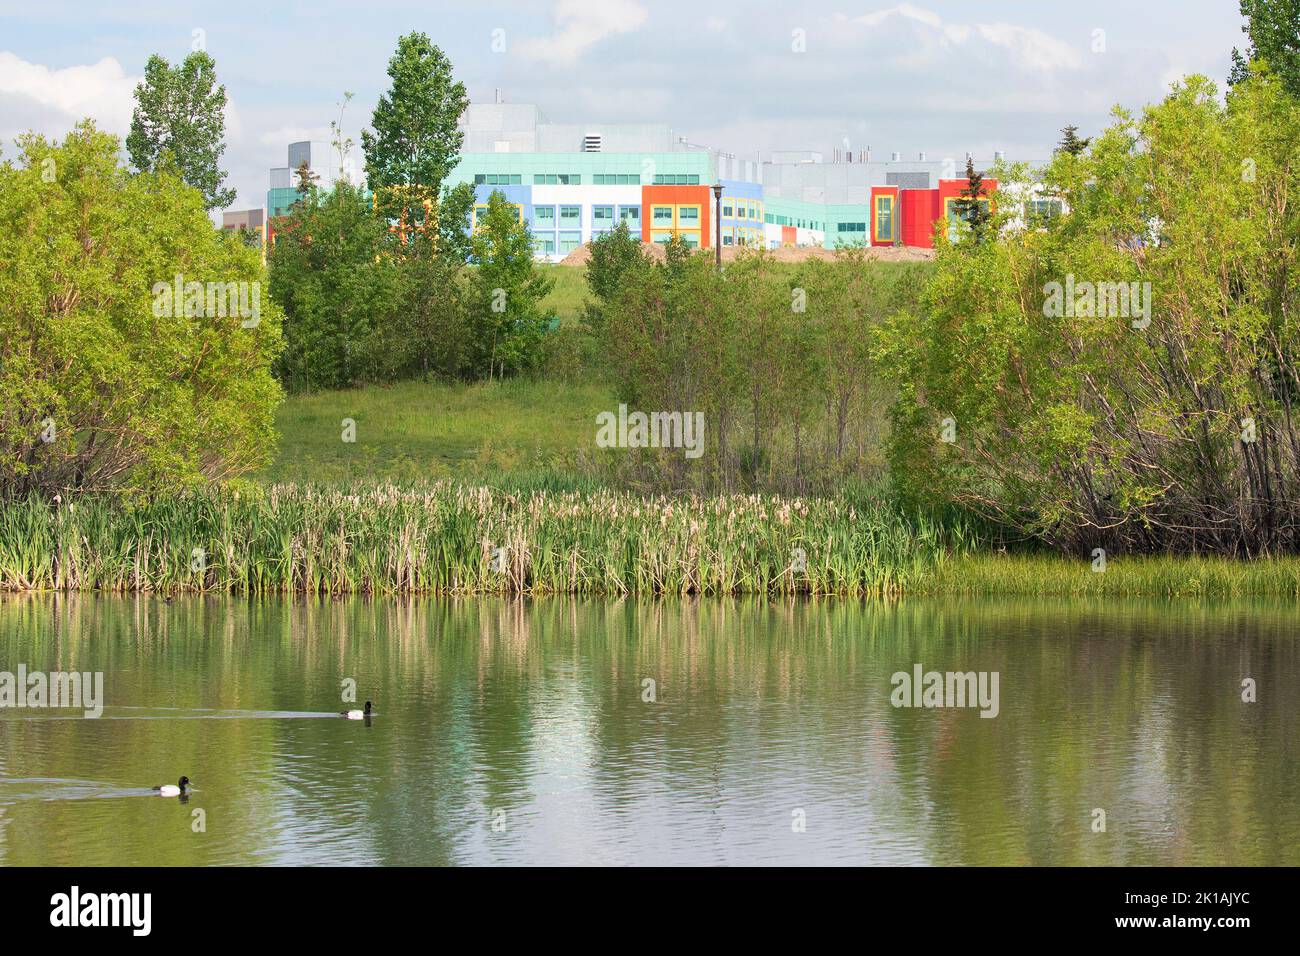 City pond built to capture stormwater, improve water quality and prevent flooding also provides urban green space with wetland wildlife habitat Stock Photo